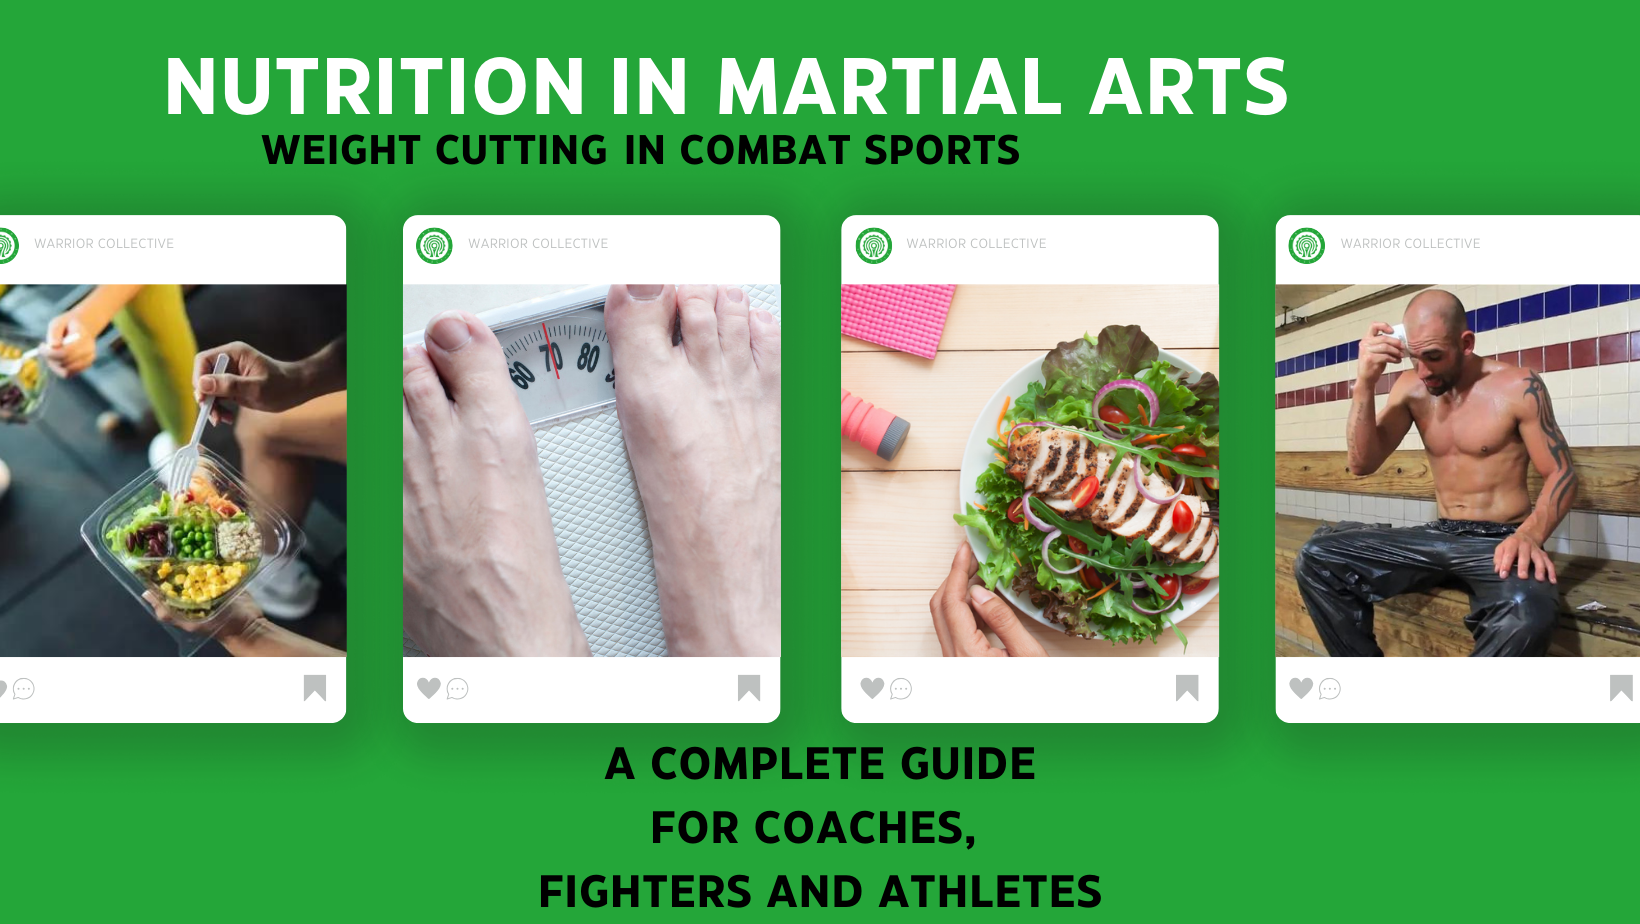 Martial arts dietary restrictions